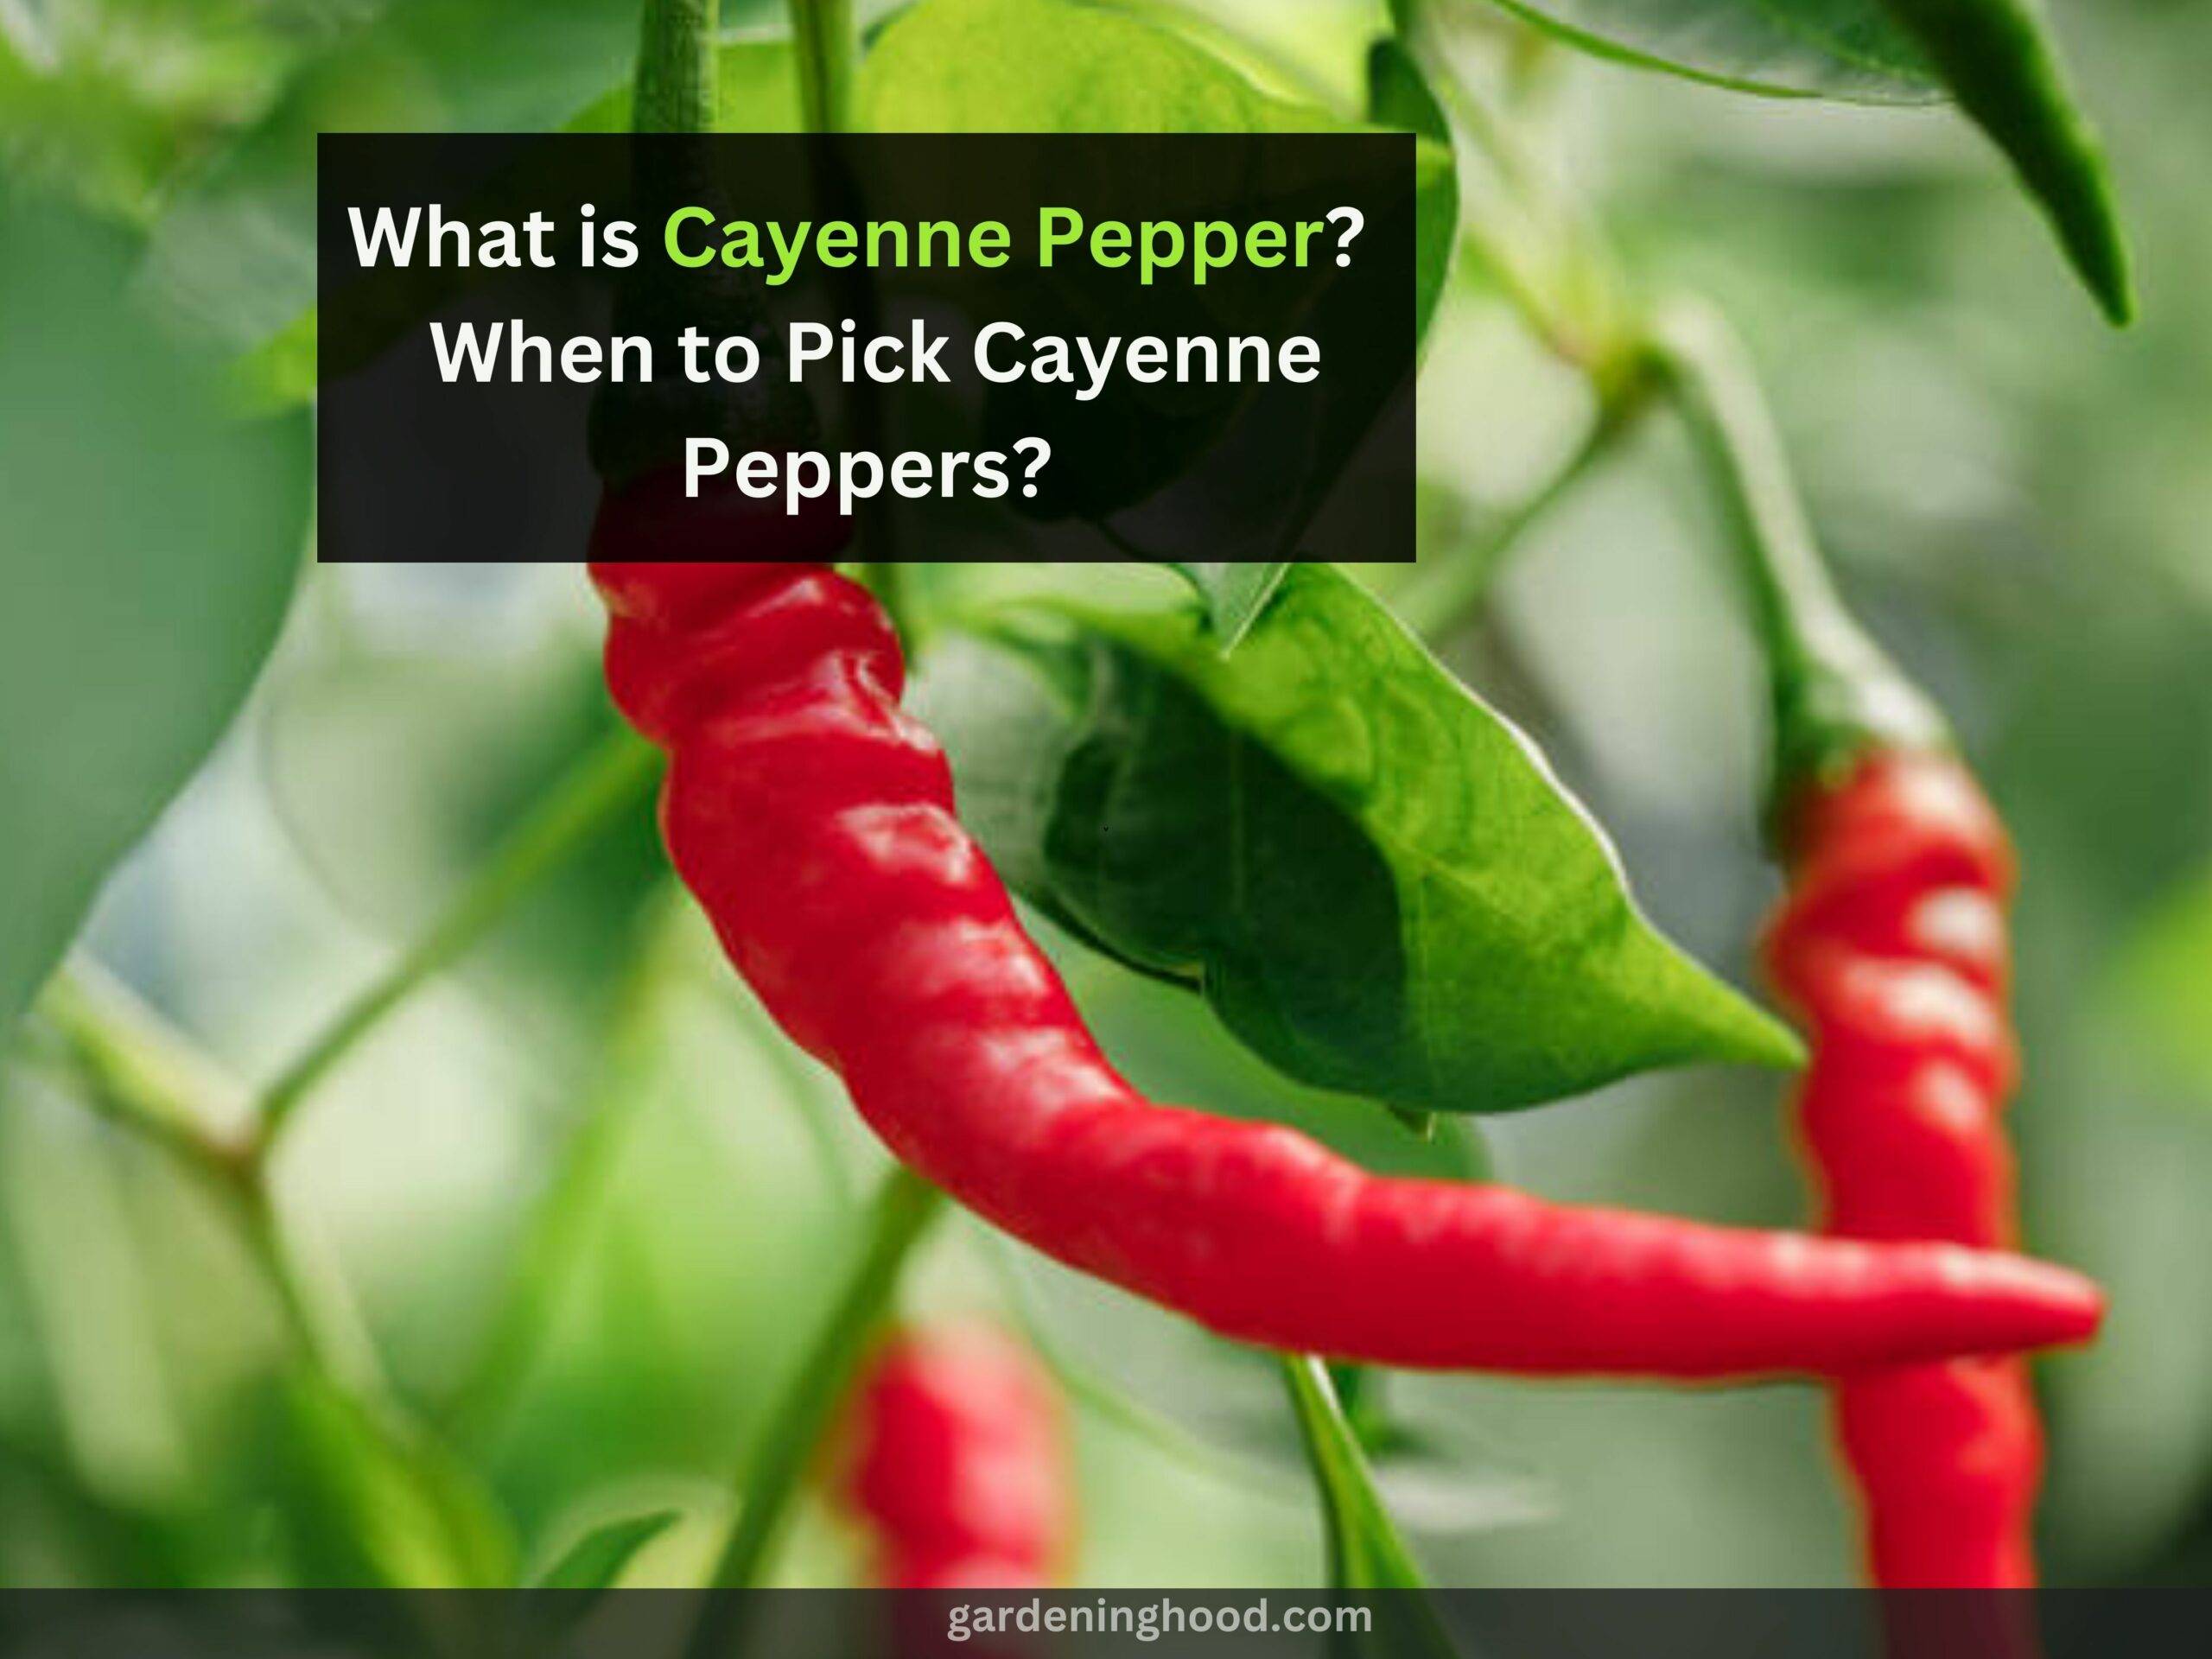 What is Cayenne Pepper? - When to Pick Cayenne Peppers? 